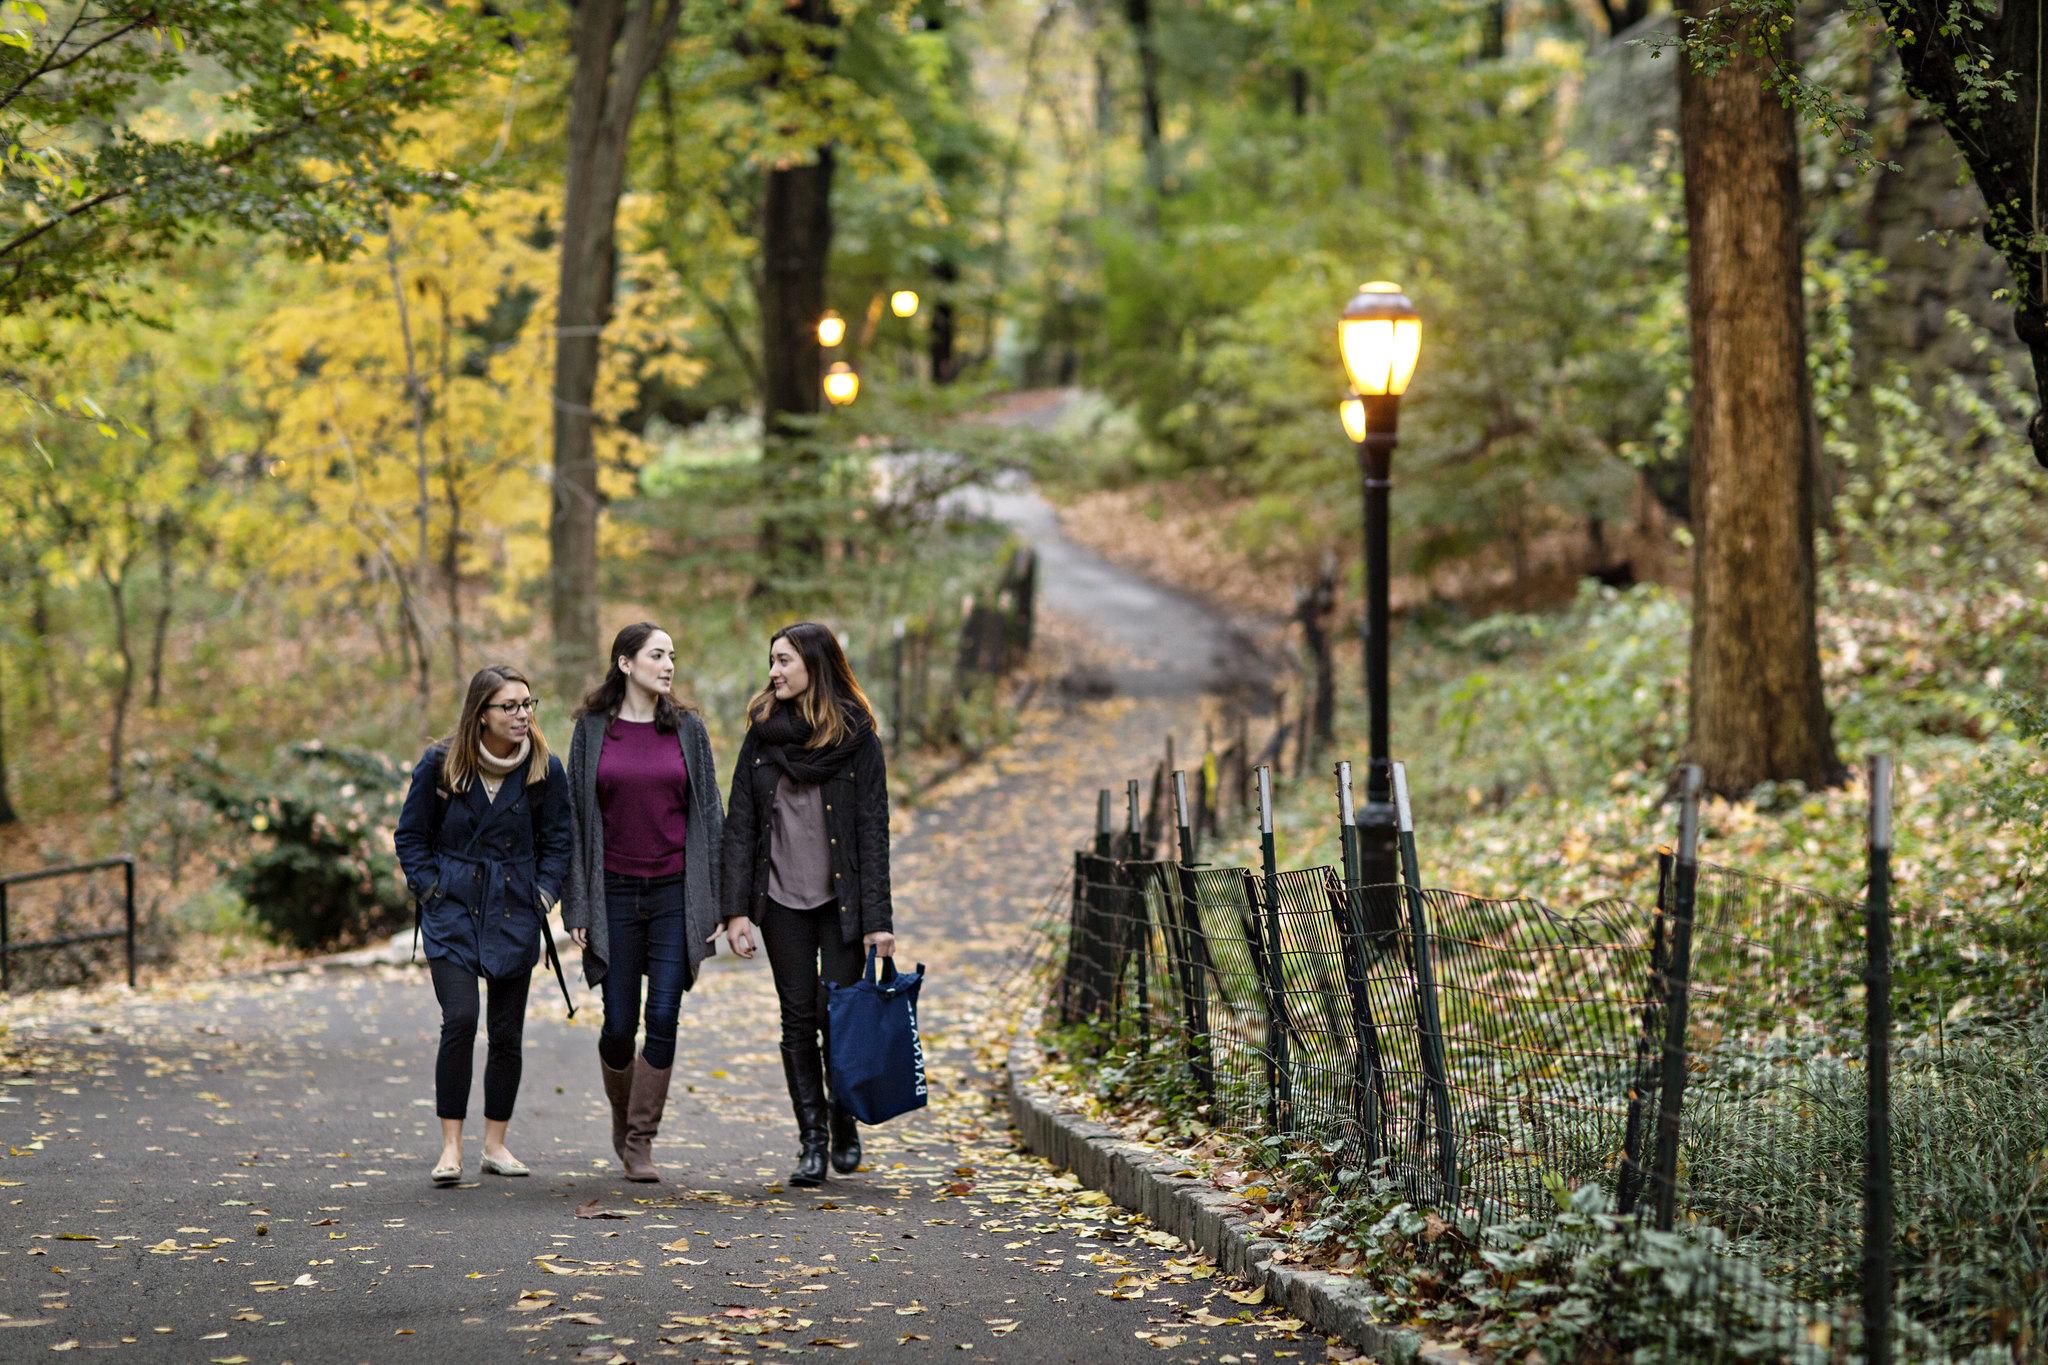 Group of young women walking in the park.